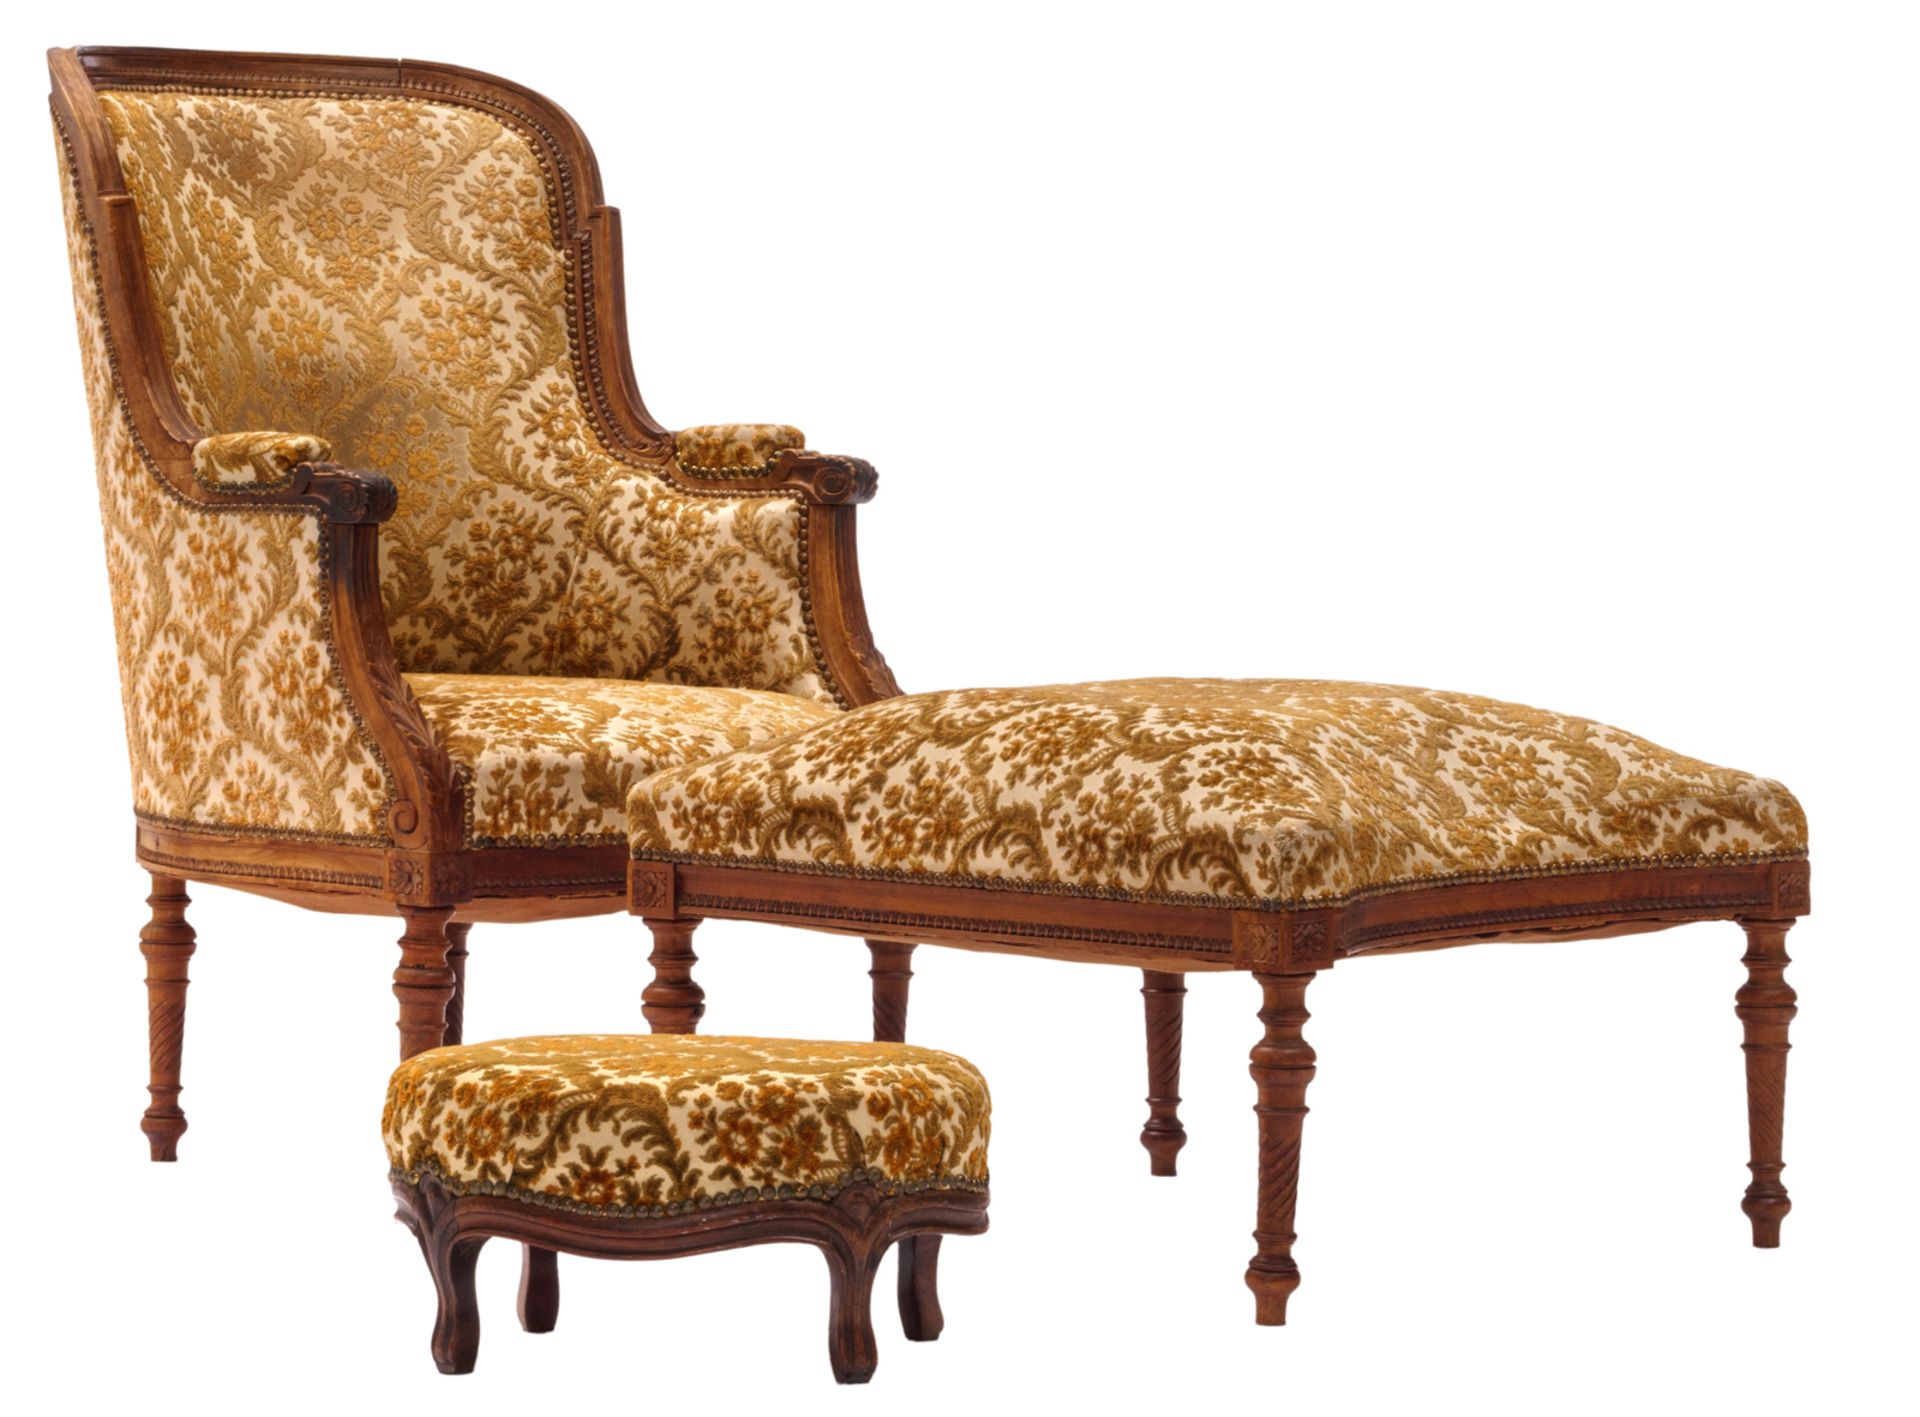 A Neoclassical duchesse brisée with an accompanying footstool, H 21 - 98 - W 43 - 70 - D 33 - 62 cm